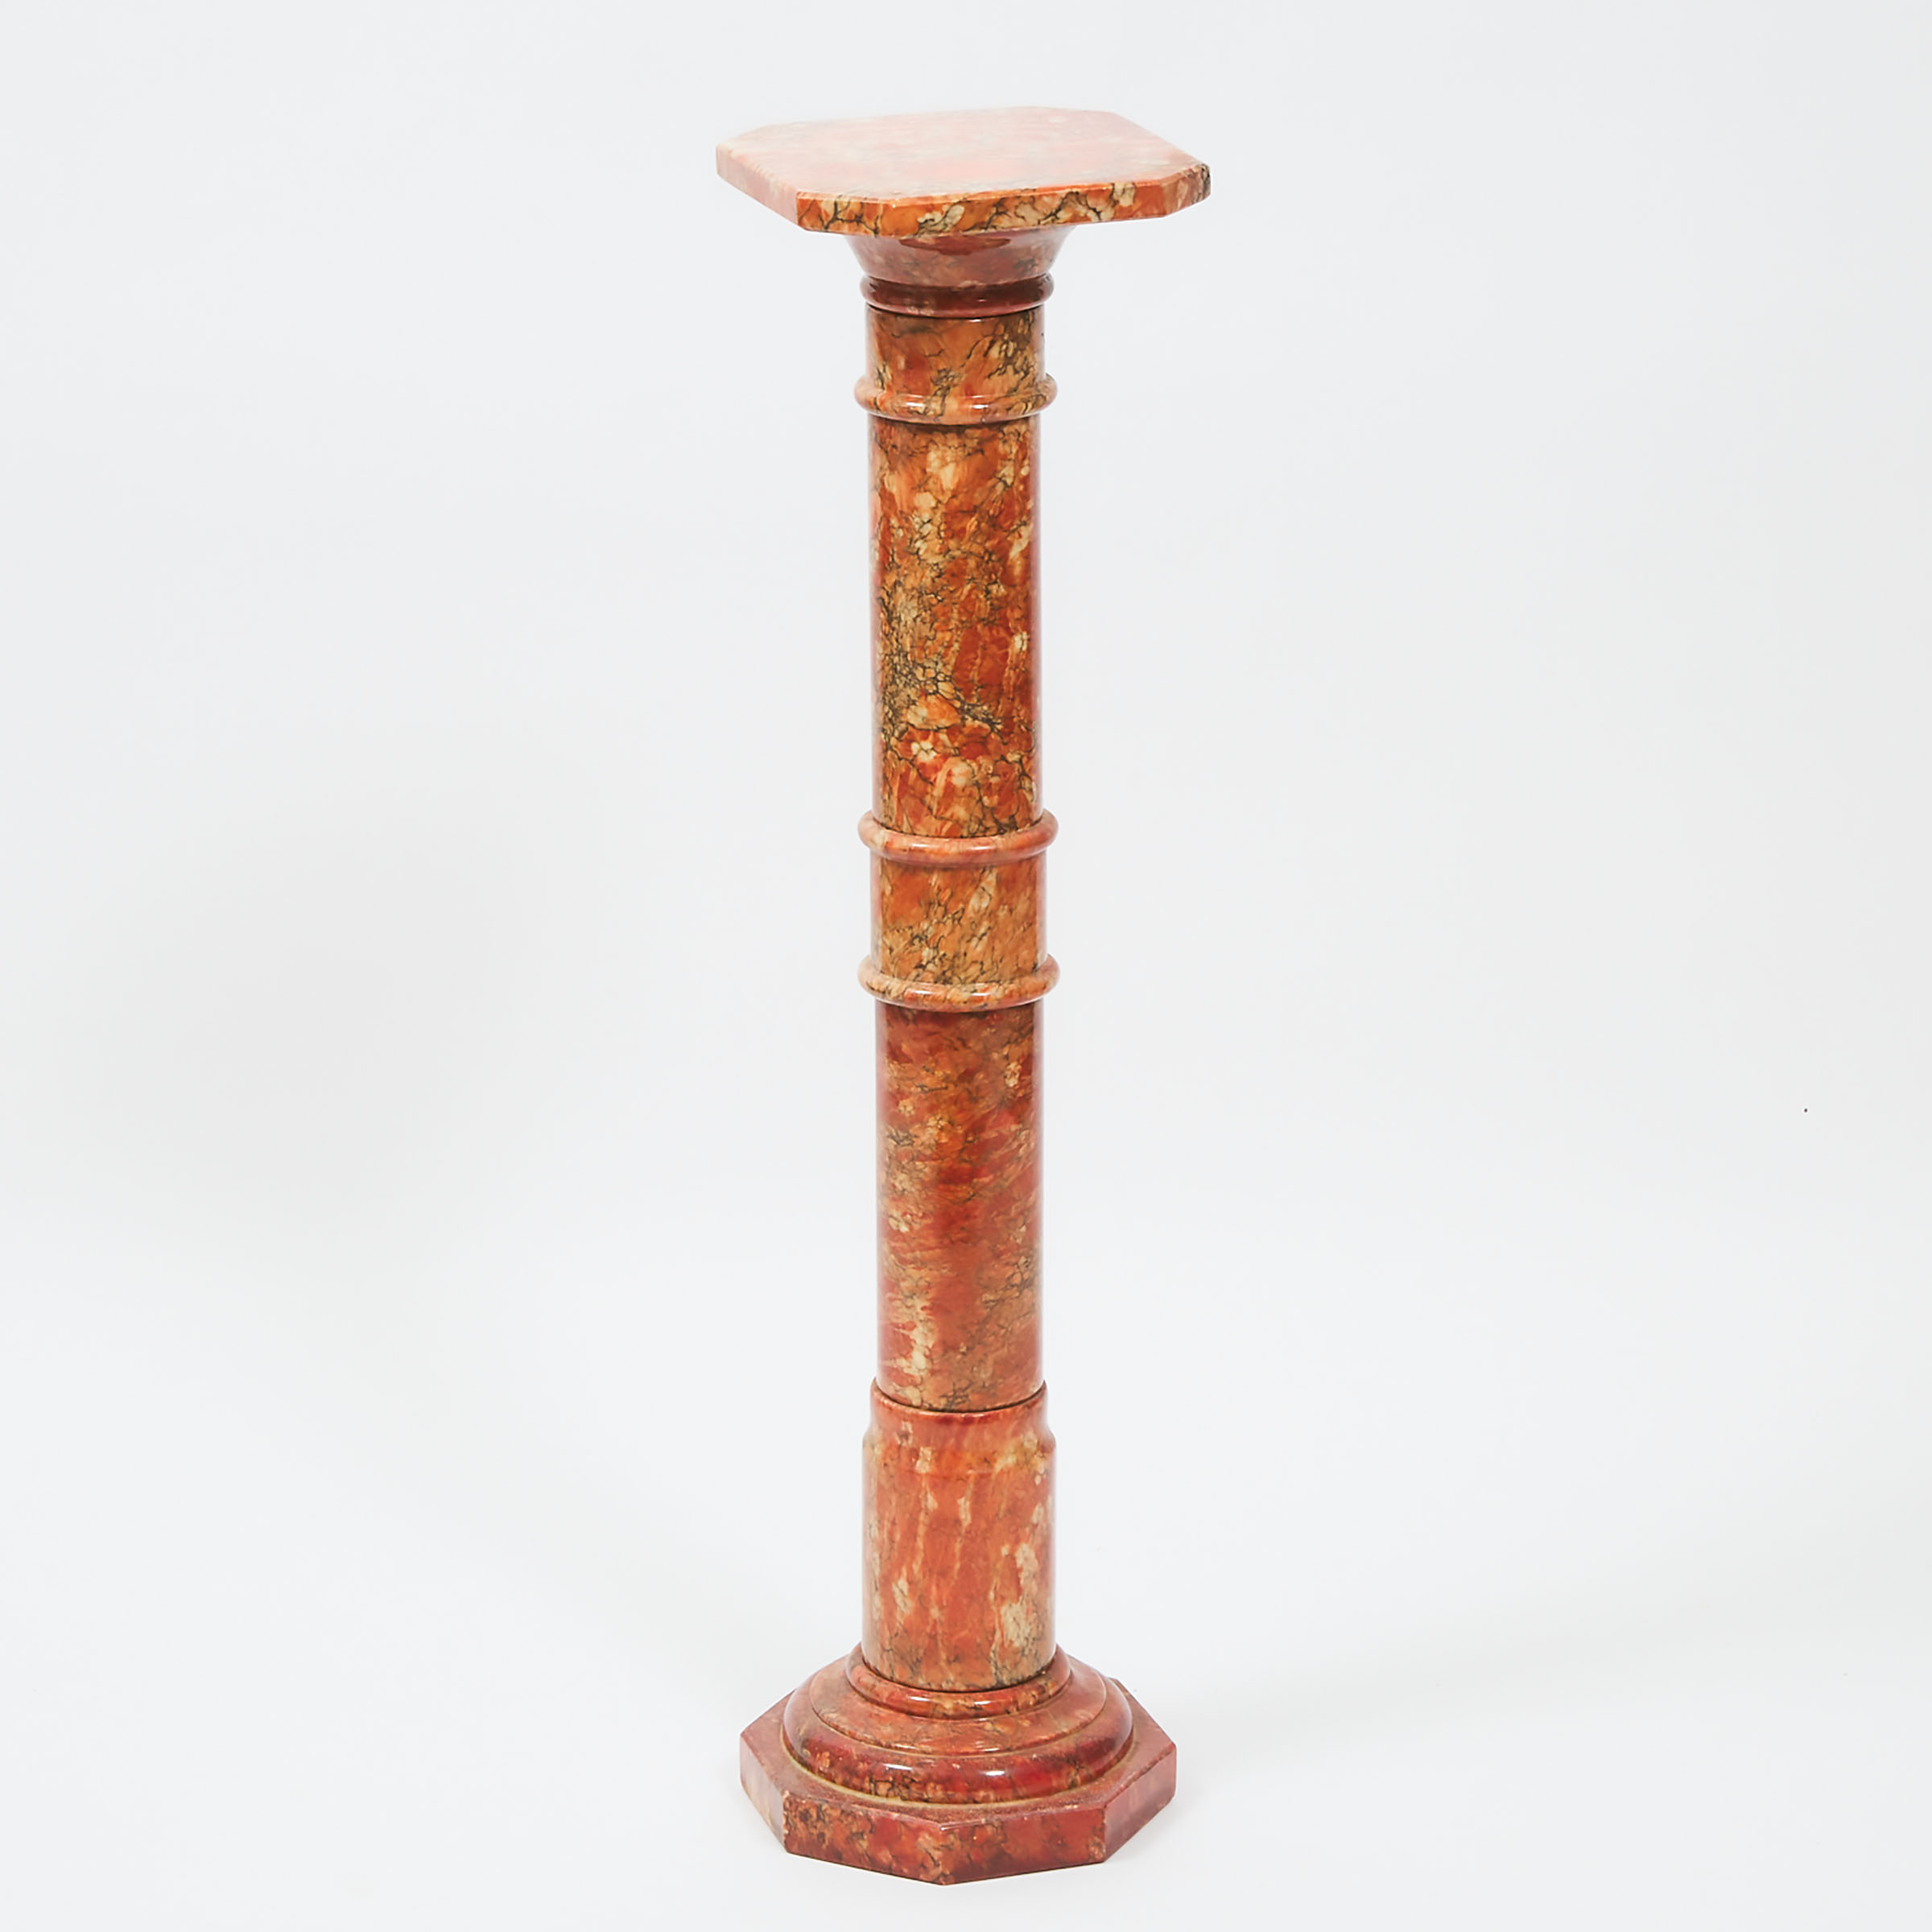 Italian White and Grey Variegated Red Marble Column Form Pedestal, c.1900 